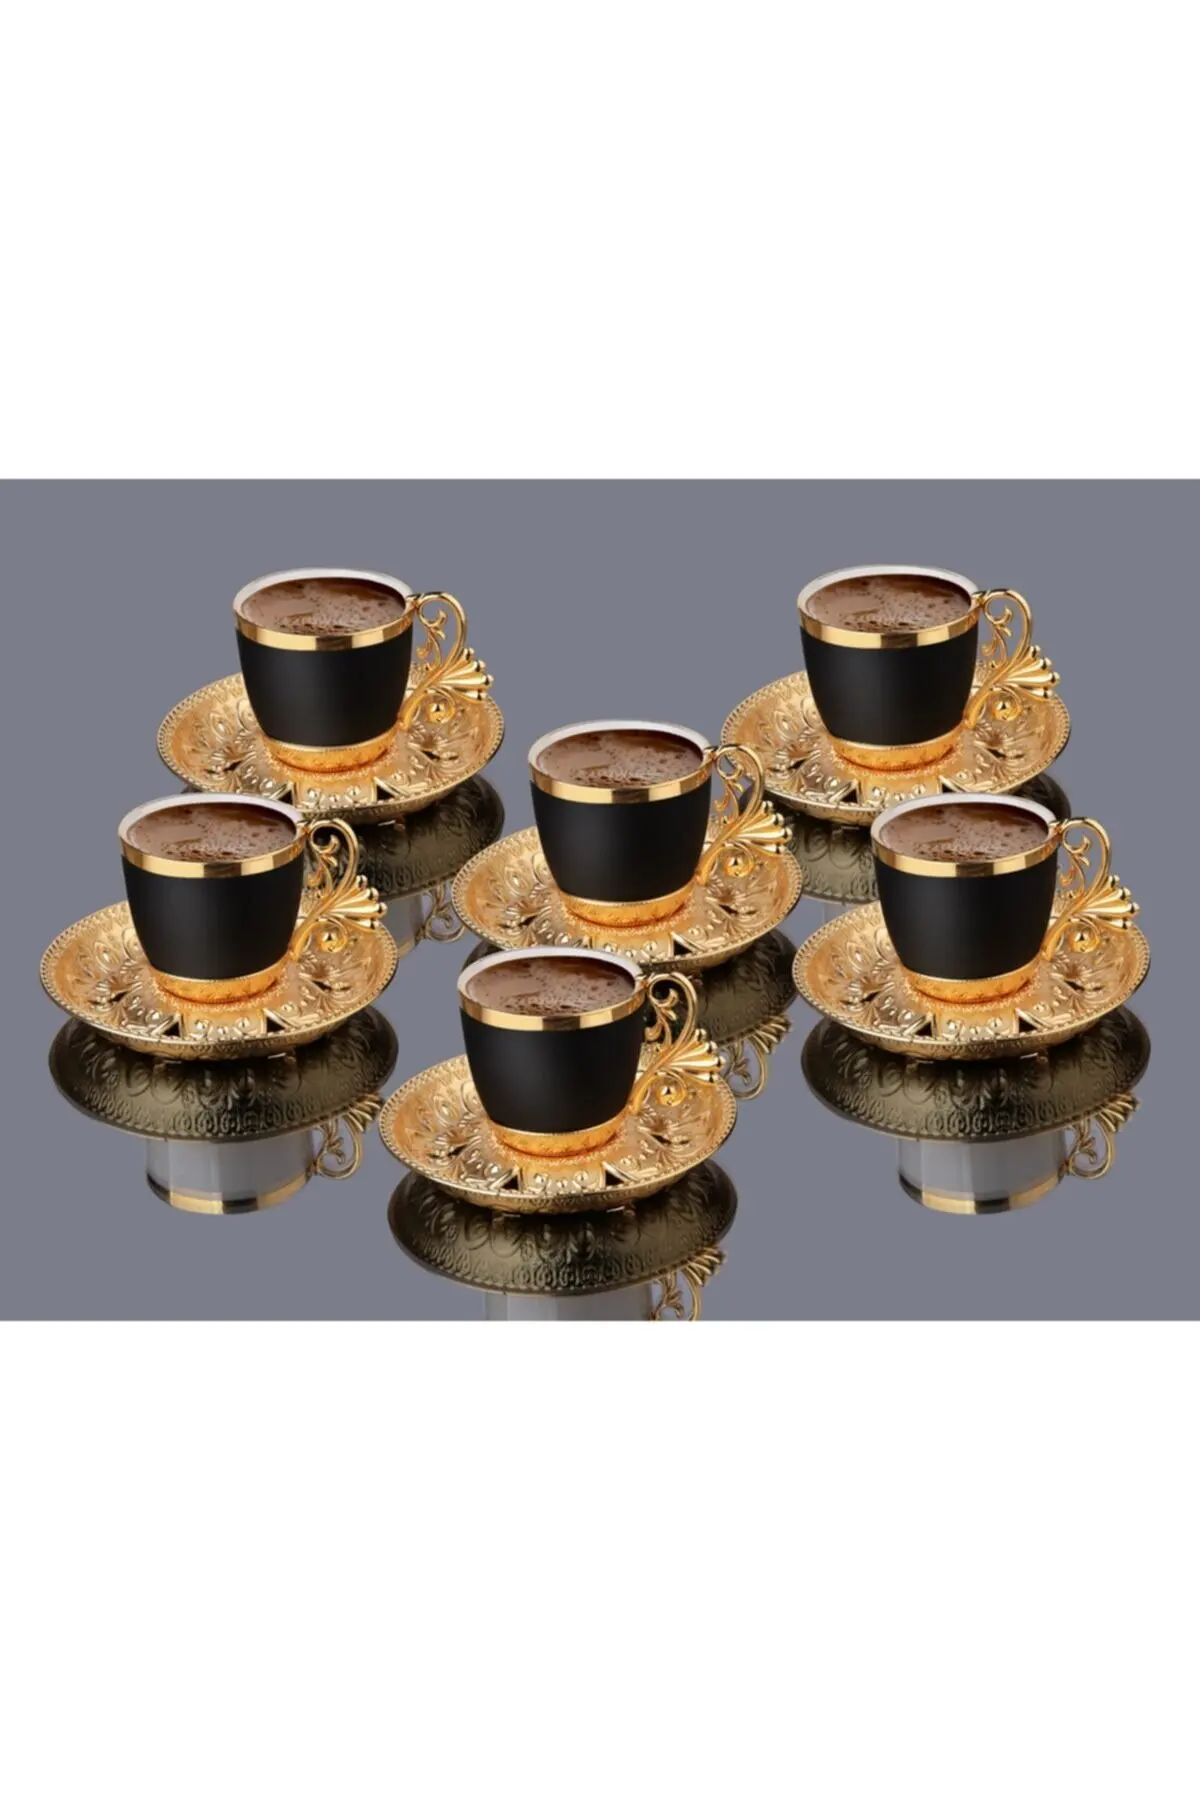 Turkish Golden Coffee Cups and Saucers Serving Set Ceramic Coffee Mugs –  Alici Home